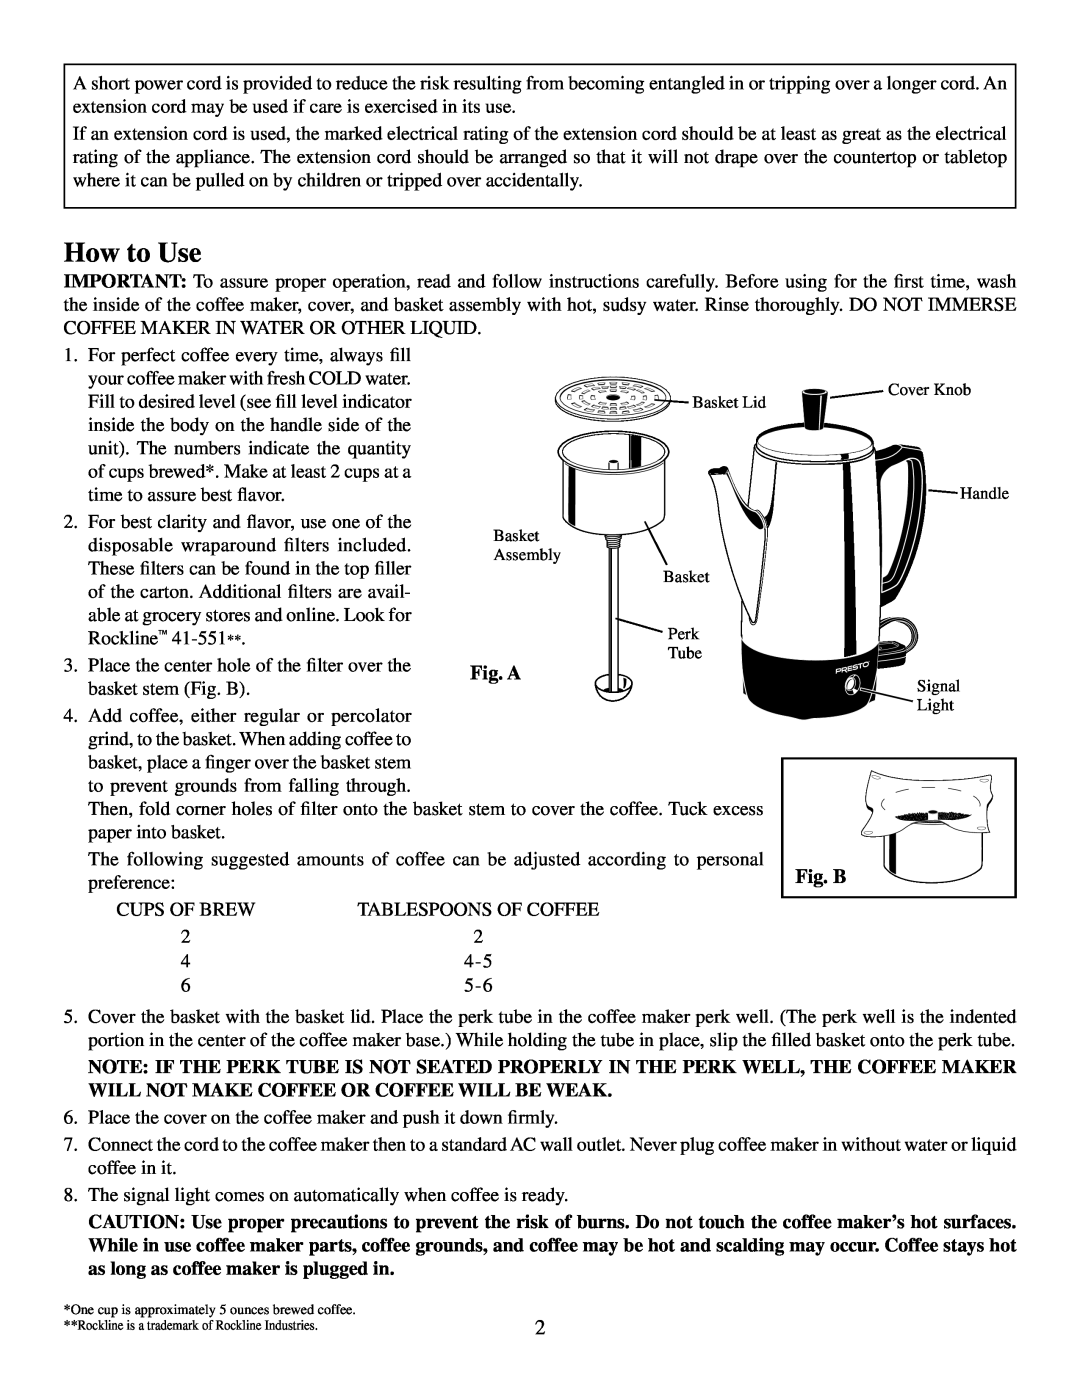 Presto Coffeemaker manual How to Use, Fig. A, Fig. B 